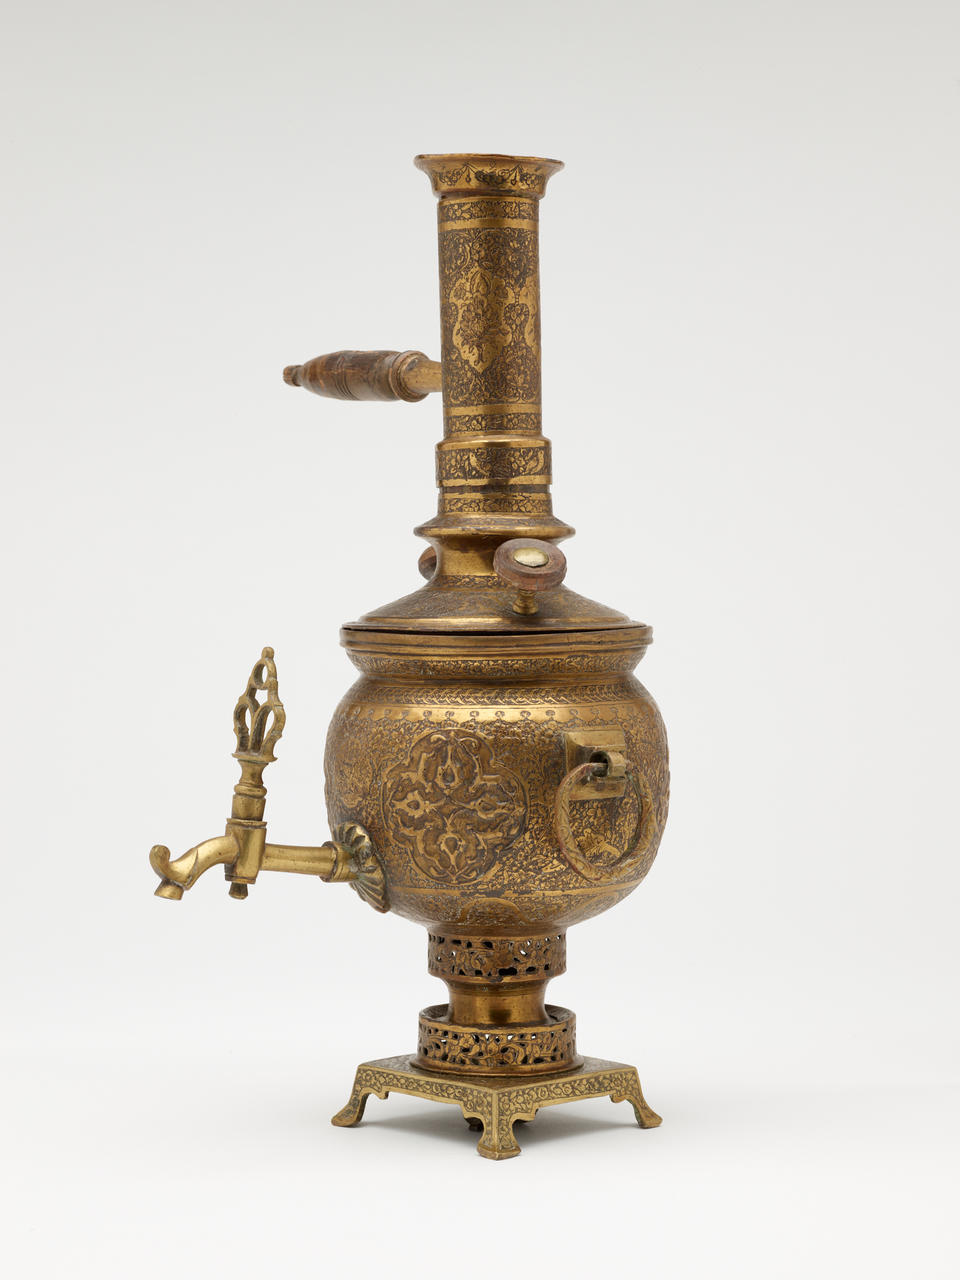 A brass and wood tea instrument that has a decorative foot, lid, various handles and rings, and spout. The entire vessel has highly decorative engravings. 